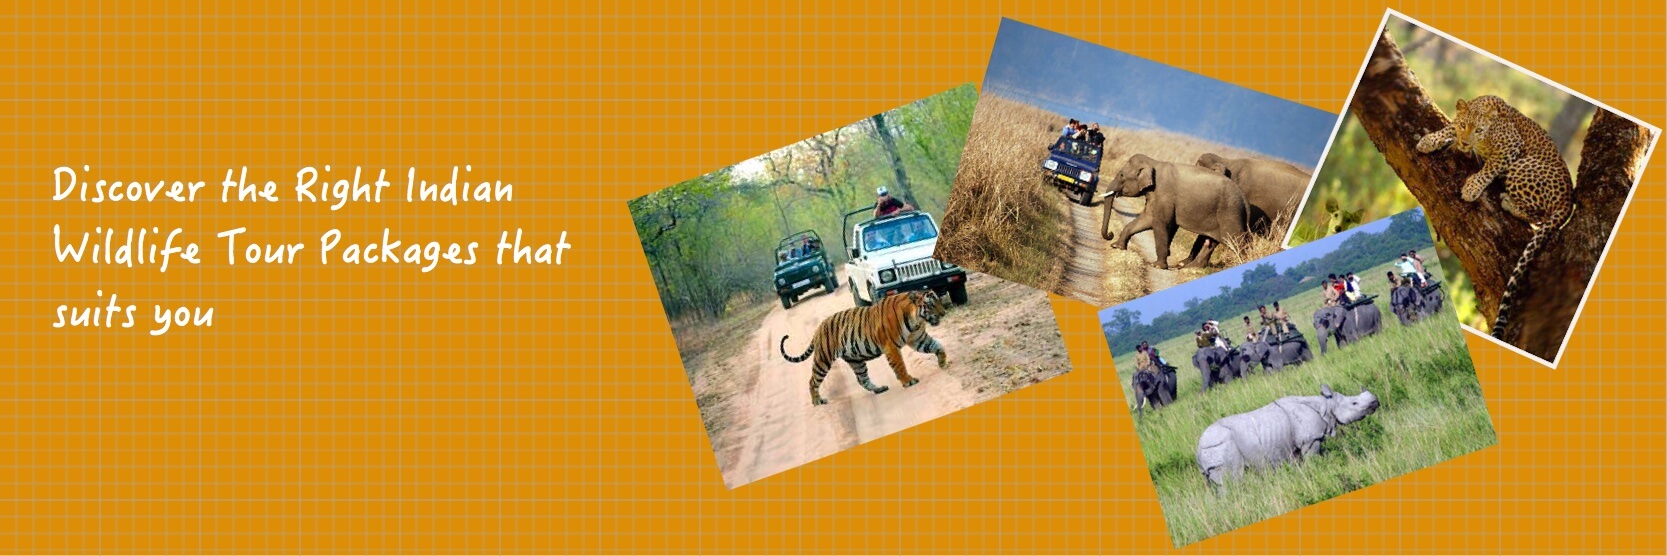 app is the best way to get all the details about Indian wildlife sanctuaries (best travel times, animal sightings, accommodations, prices, etc).